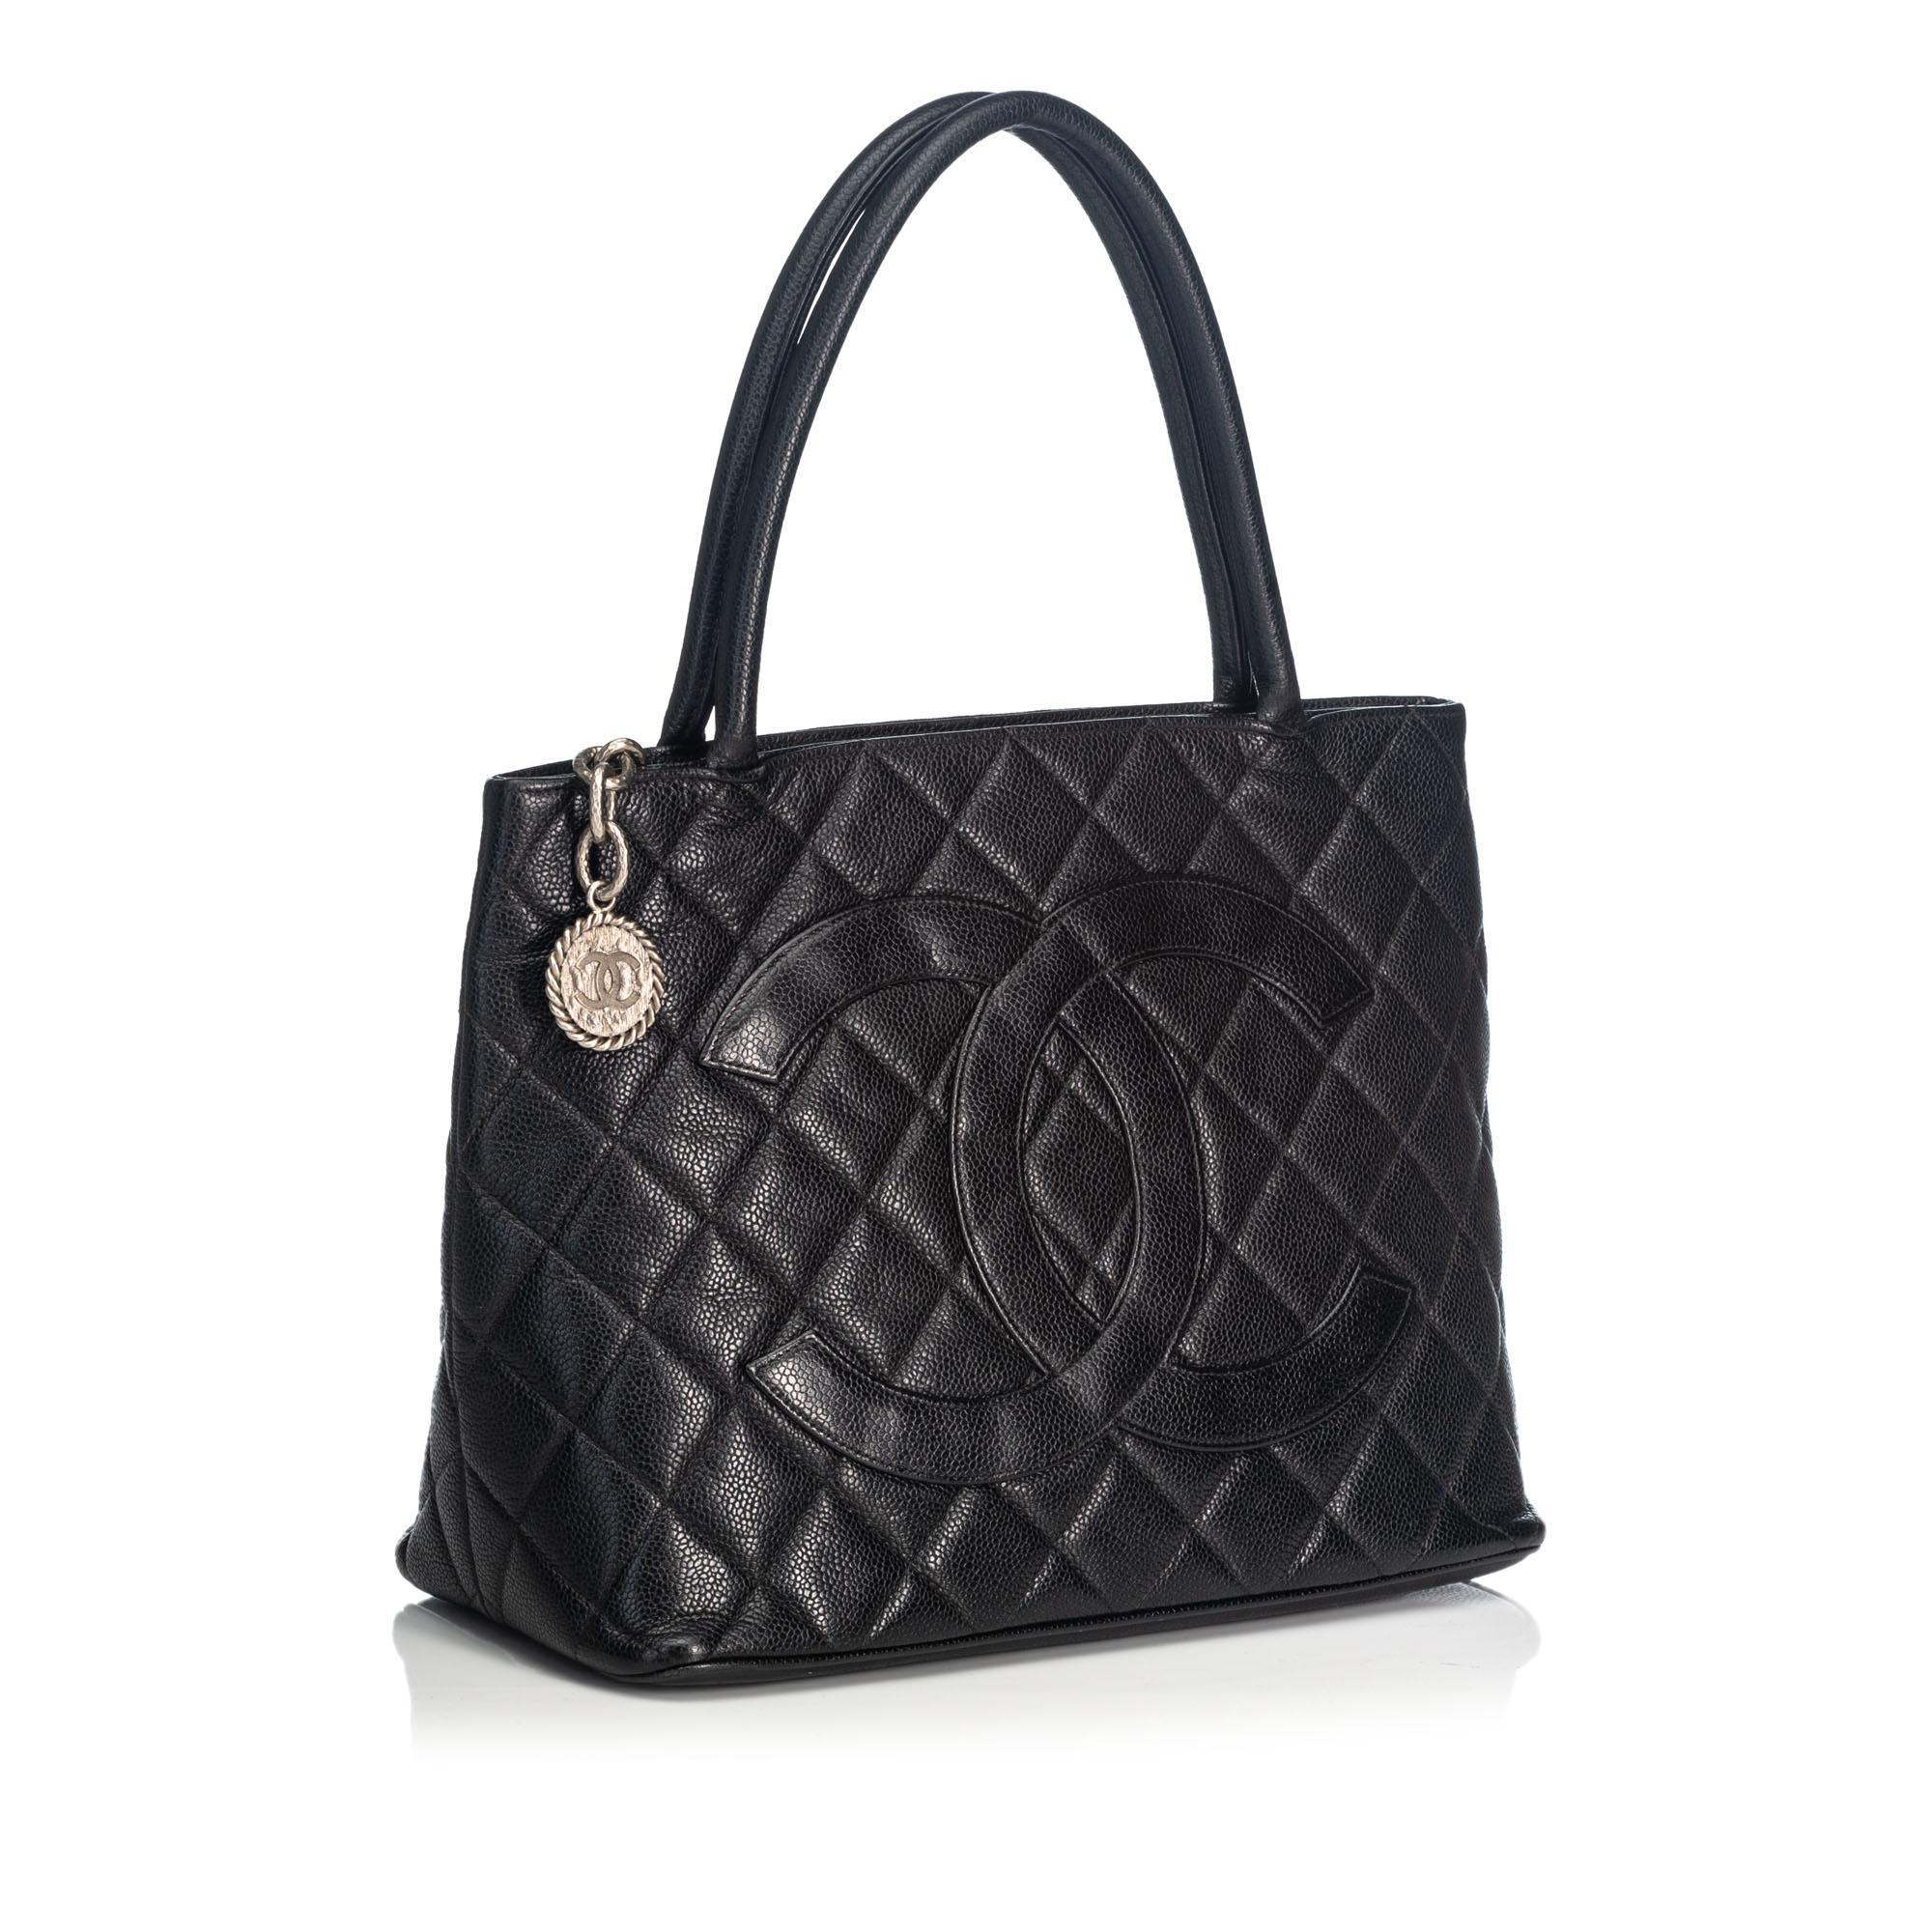 The Medallion tote features a quilted caviar leather body, rolled leather handles, a top zip closure, exterior back slip pocket, and an interior zip pocket. It carries as B+ condition rating.

Inclusions: 
This item does not come with